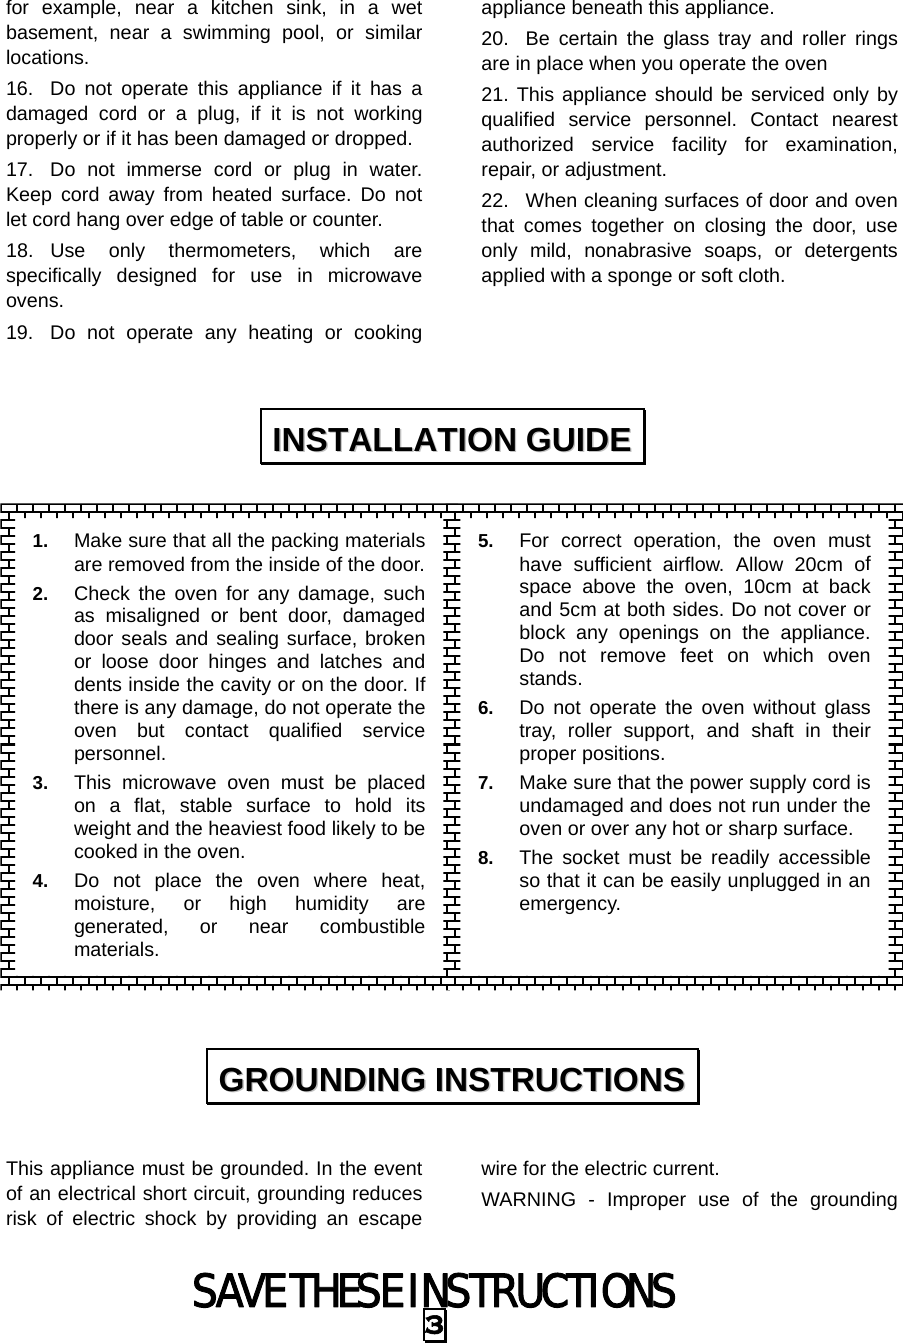 SAVE THESE INSTRUCTIONS 3 for example, near a kitchen sink, in a wet basement, near a swimming pool, or similar locations. 16.  Do not operate this appliance if it has a damaged cord or a plug, if it is not working properly or if it has been damaged or dropped. 17.  Do not immerse cord or plug in water. Keep cord away from heated surface. Do not let cord hang over edge of table or counter. 18. Use only thermometers, which are specifically designed for use in microwave ovens. 19.  Do not operate any heating or cooking appliance beneath this appliance. 20.  Be certain the glass tray and roller rings are in place when you operate the oven 21. This appliance should be serviced only by qualified service personnel. Contact nearest authorized service facility for examination, repair, or adjustment. 22.  When cleaning surfaces of door and oven that comes together on closing the door, use only mild, nonabrasive soaps, or detergents applied with a sponge or soft cloth.                     This appliance must be grounded. In the event of an electrical short circuit, grounding reduces risk of electric shock by providing an escape wire for the electric current.   WARNING - Improper use of the grounding IINNSSTTAALLLLAATTIIOONN  GGUUIIDDEE  GGRROOUUNNDDIINNGG  IINNSSTTRRUUCCTTIIOONNSS  1.  Make sure that all the packing materials are removed from the inside of the door.2.  Check the oven for any damage, suchas misaligned or bent door, damageddoor seals and sealing surface, brokenor loose door hinges and latches anddents inside the cavity or on the door. Ifthere is any damage, do not operate theoven but contact qualified servicepersonnel. 3.  This microwave oven must be placedon a flat, stable surface to hold itsweight and the heaviest food likely to becooked in the oven.   4.  Do not place the oven where heat,moisture, or high humidity aregenerated, or near combustiblematerials. 5.  For correct operation, the oven must have sufficient airflow. Allow 20cm of space above the oven, 10cm at back and 5cm at both sides. Do not cover or block any openings on the appliance. Do not remove feet on which oven stands. 6.  Do not operate the oven without glass tray, roller support, and shaft in their proper positions.   7.  Make sure that the power supply cord is undamaged and does not run under the oven or over any hot or sharp surface. 8.  The socket must be readily accessible so that it can be easily unplugged in an emergency. 